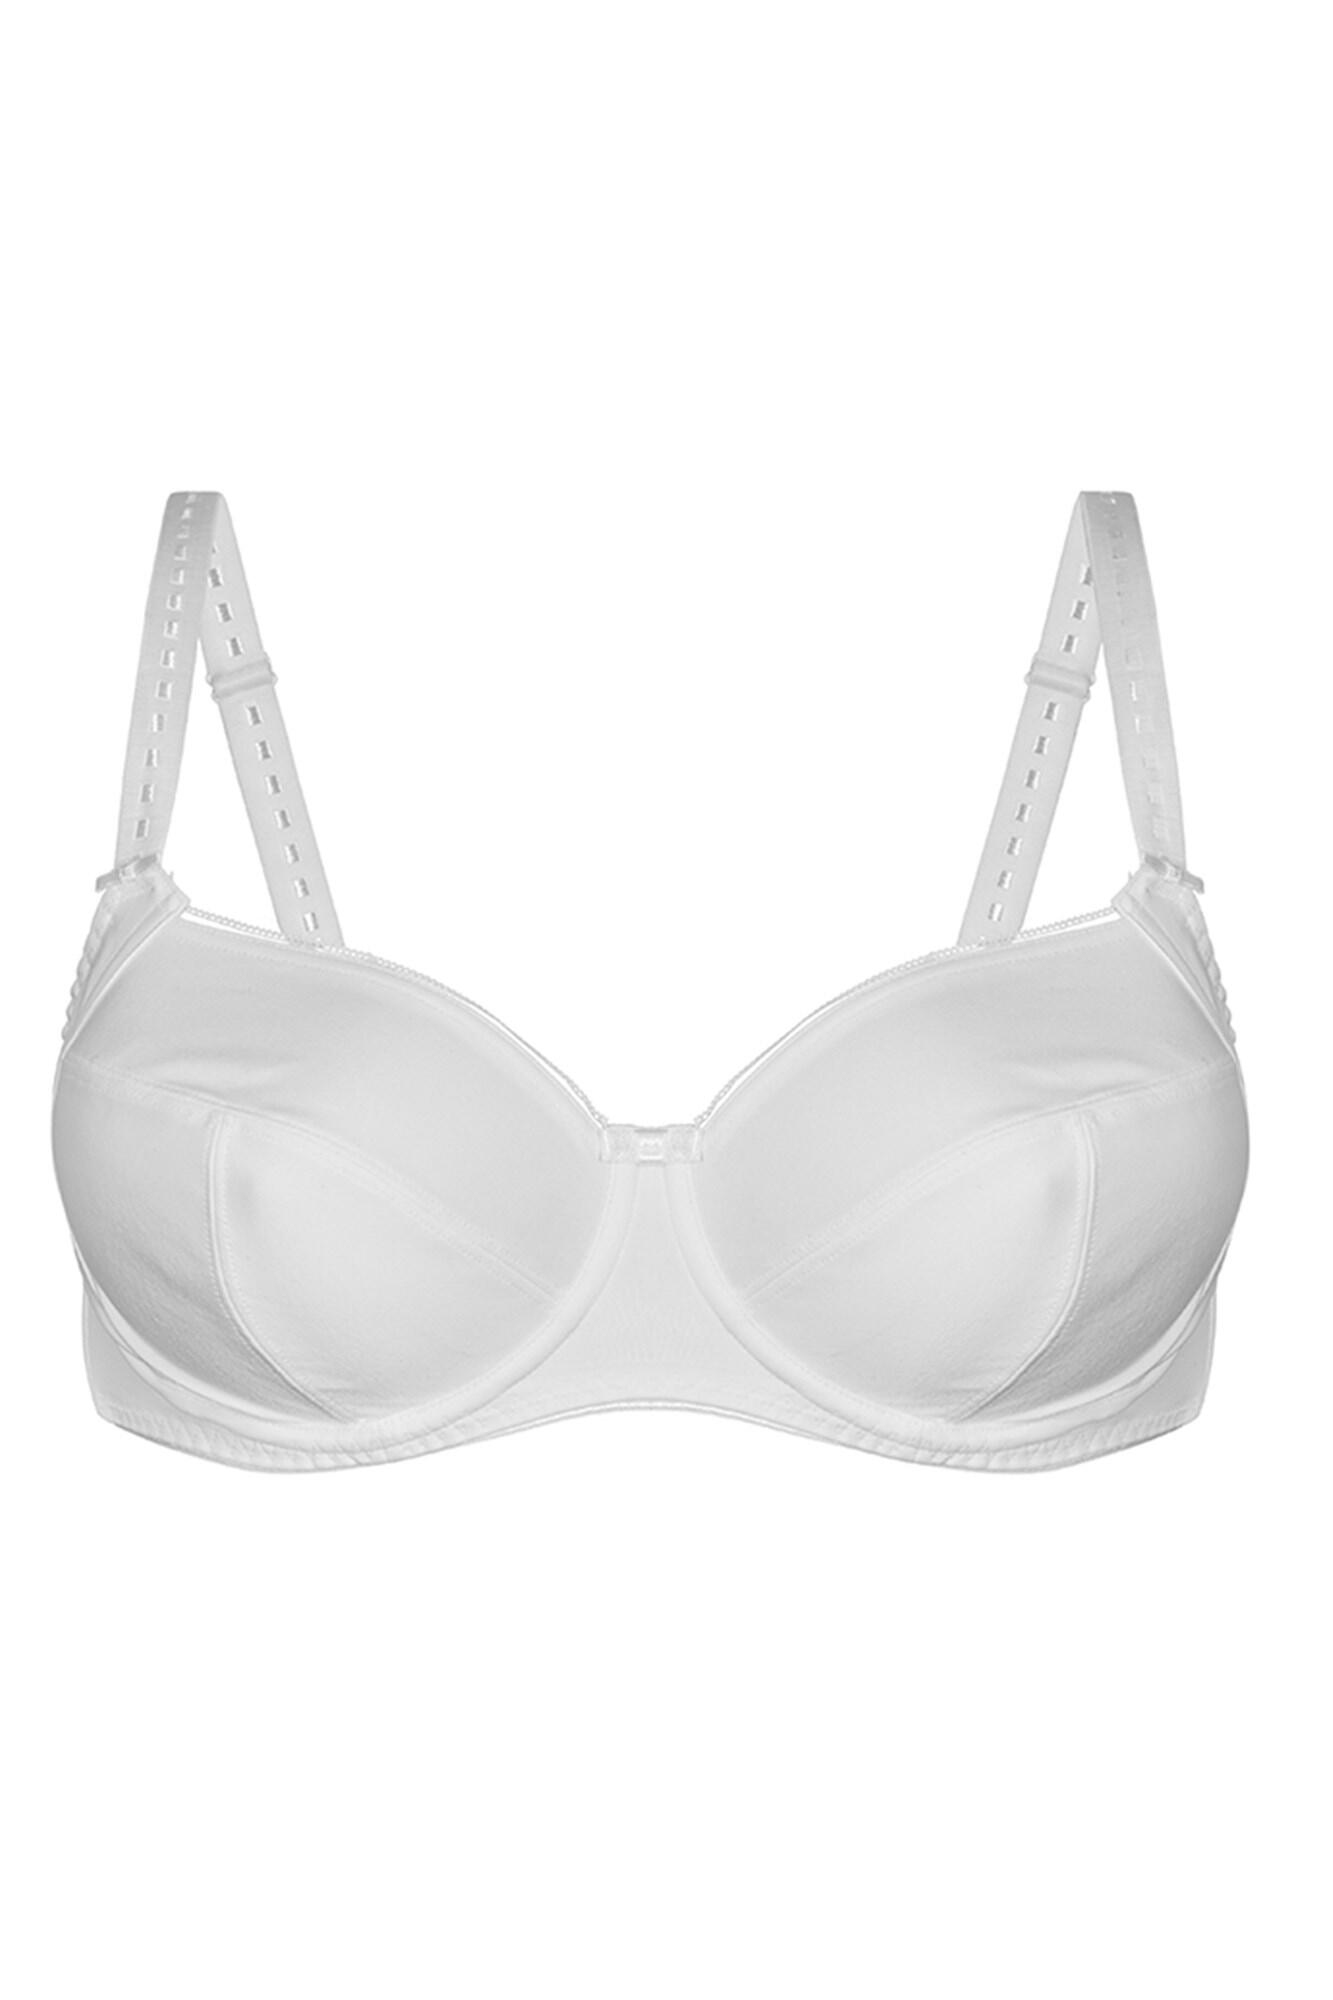 Superfit Everyday Full Cup Bra White Pour Moi